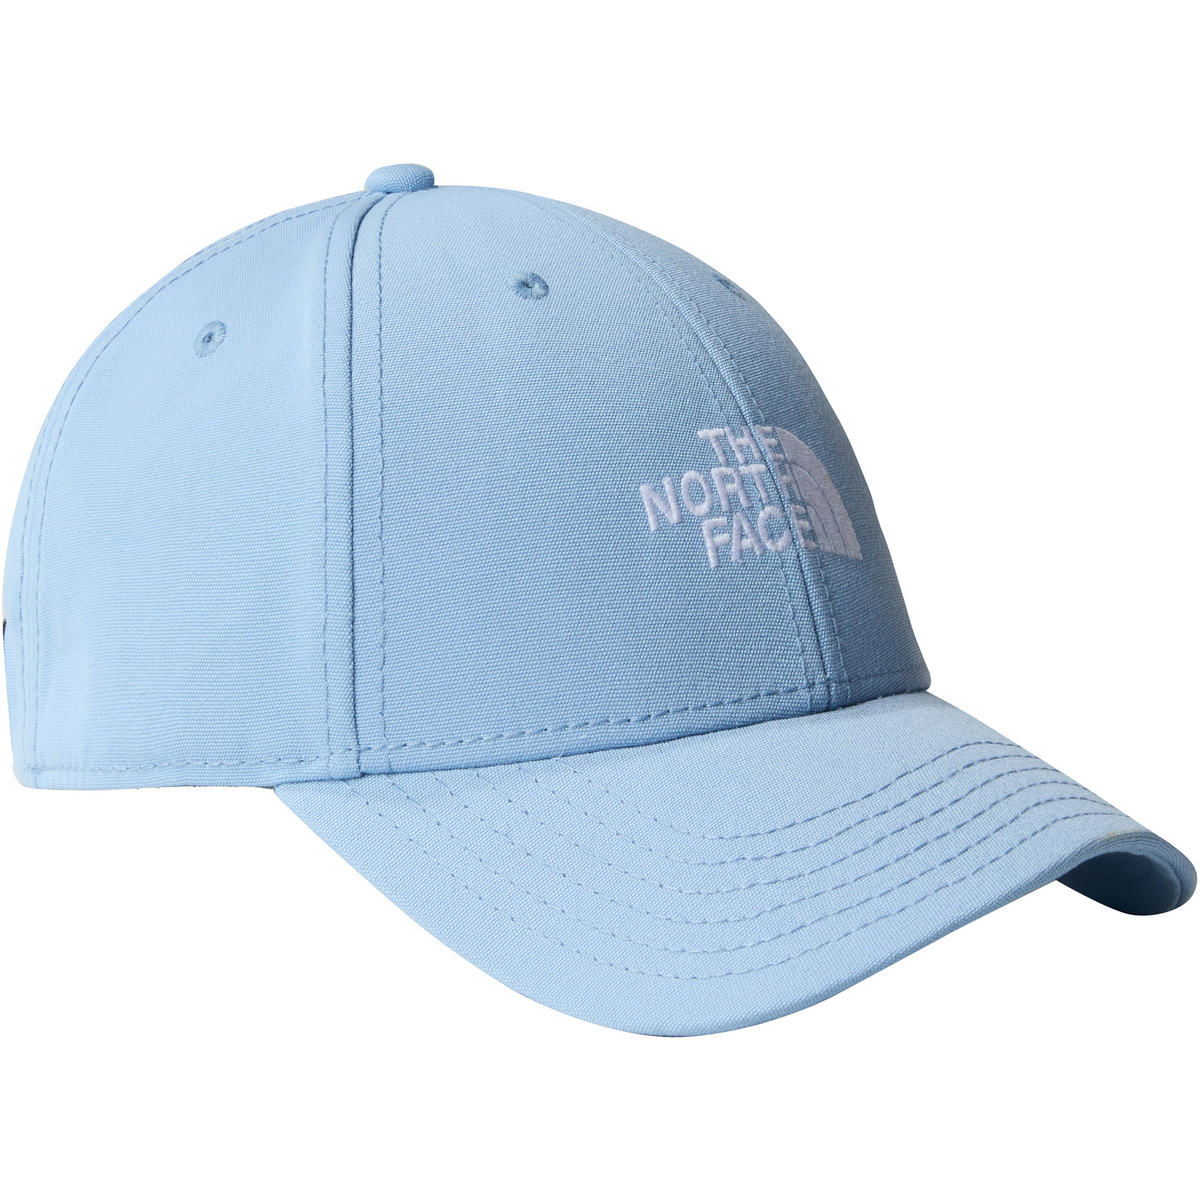 The North Face Rcyd 66 Classic Cap von The North Face